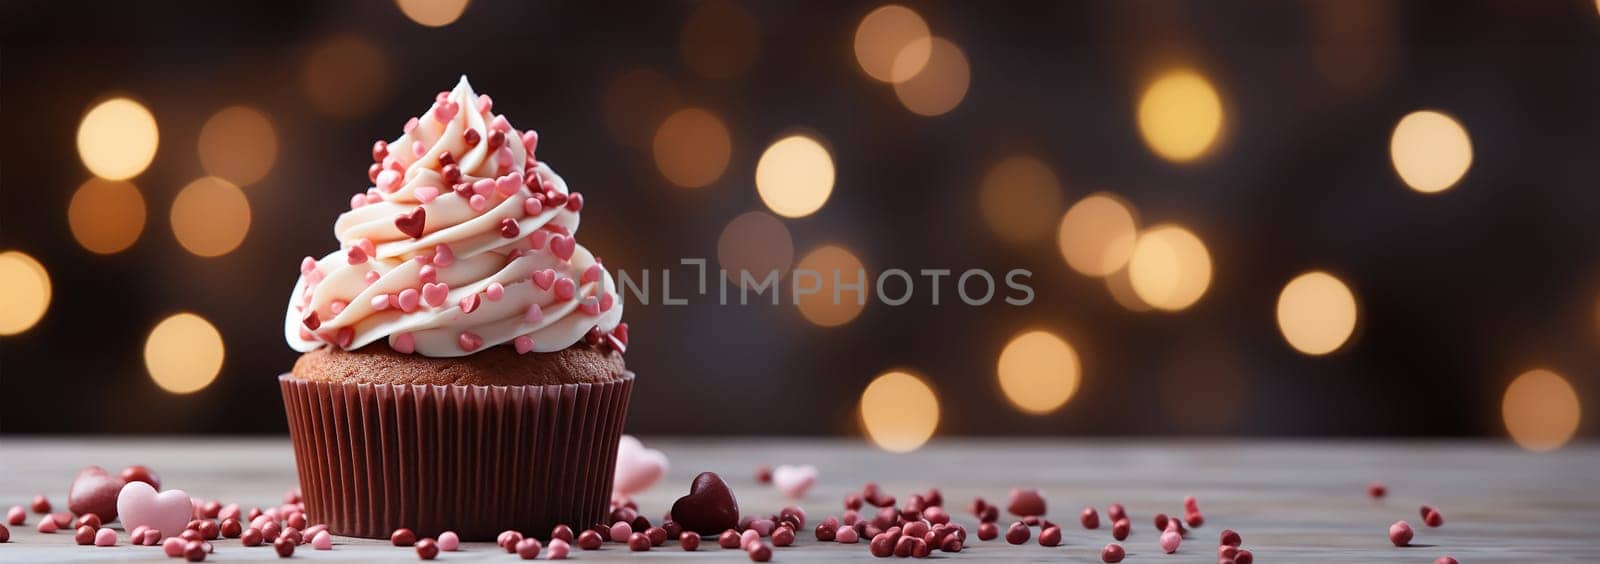 Banner Festive cupcakes with a heart inside for Valentine's Day decorated with sprinkles with hearts. Love concept. Selective focus. Delicious sweets Valentine's Day by Annebel146